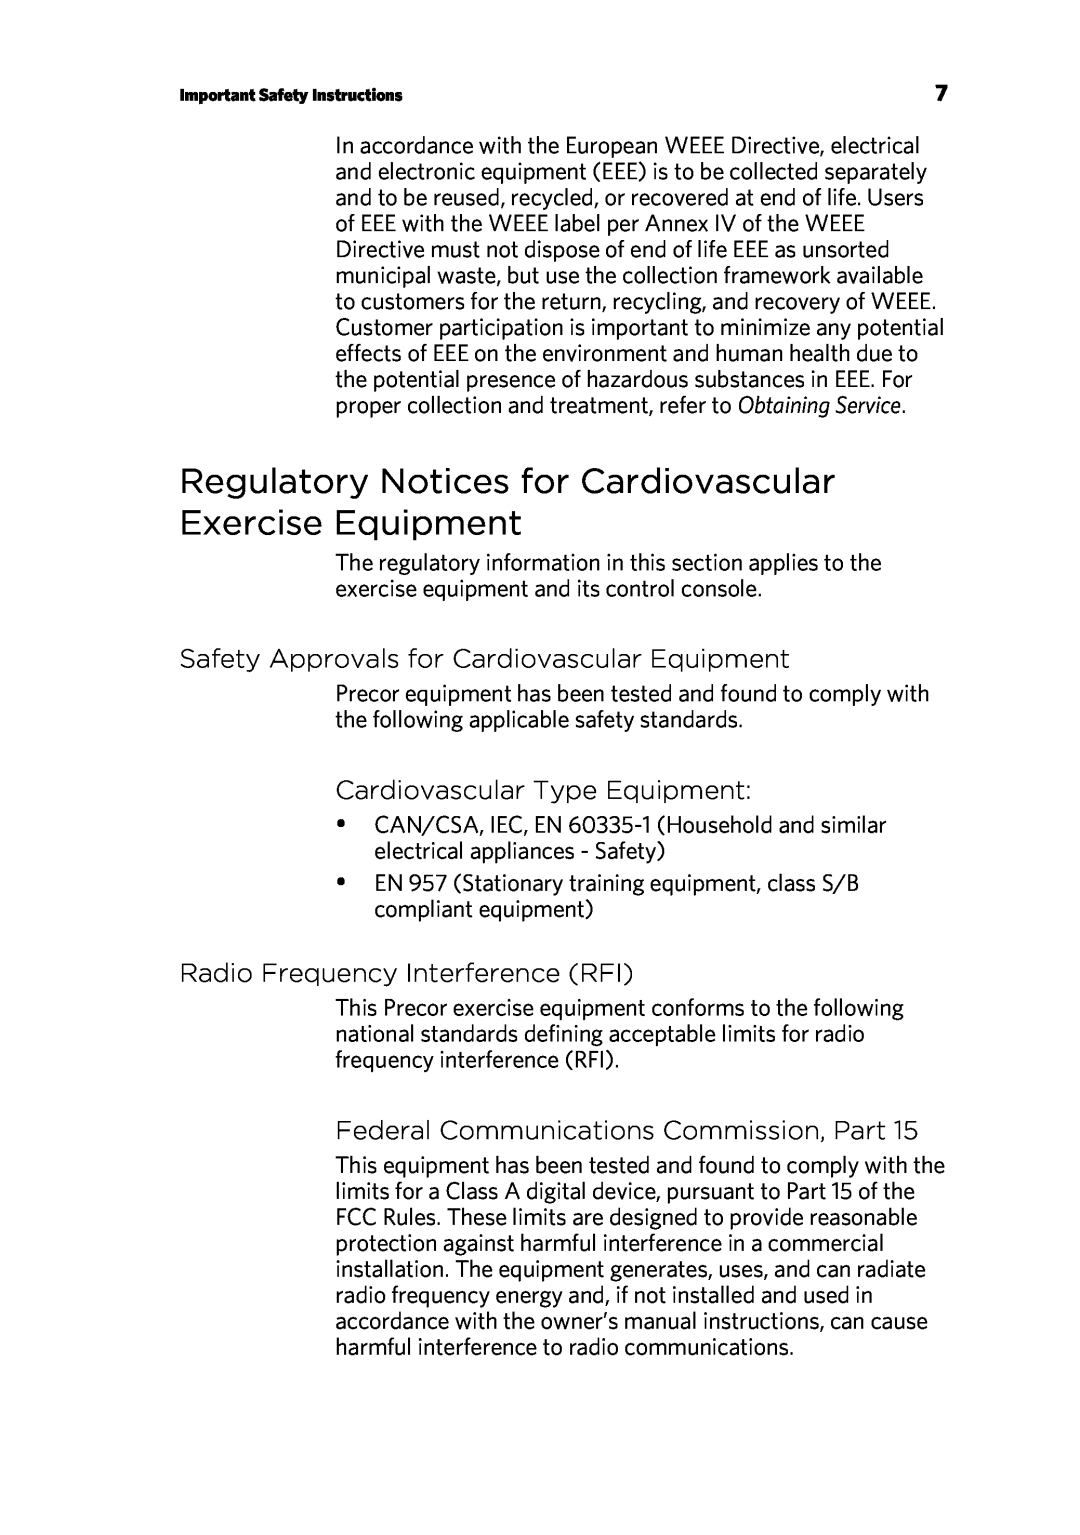 Precor 300753-201 Regulatory Notices for Cardiovascular Exercise Equipment, Safety Approvals for Cardiovascular Equipment 